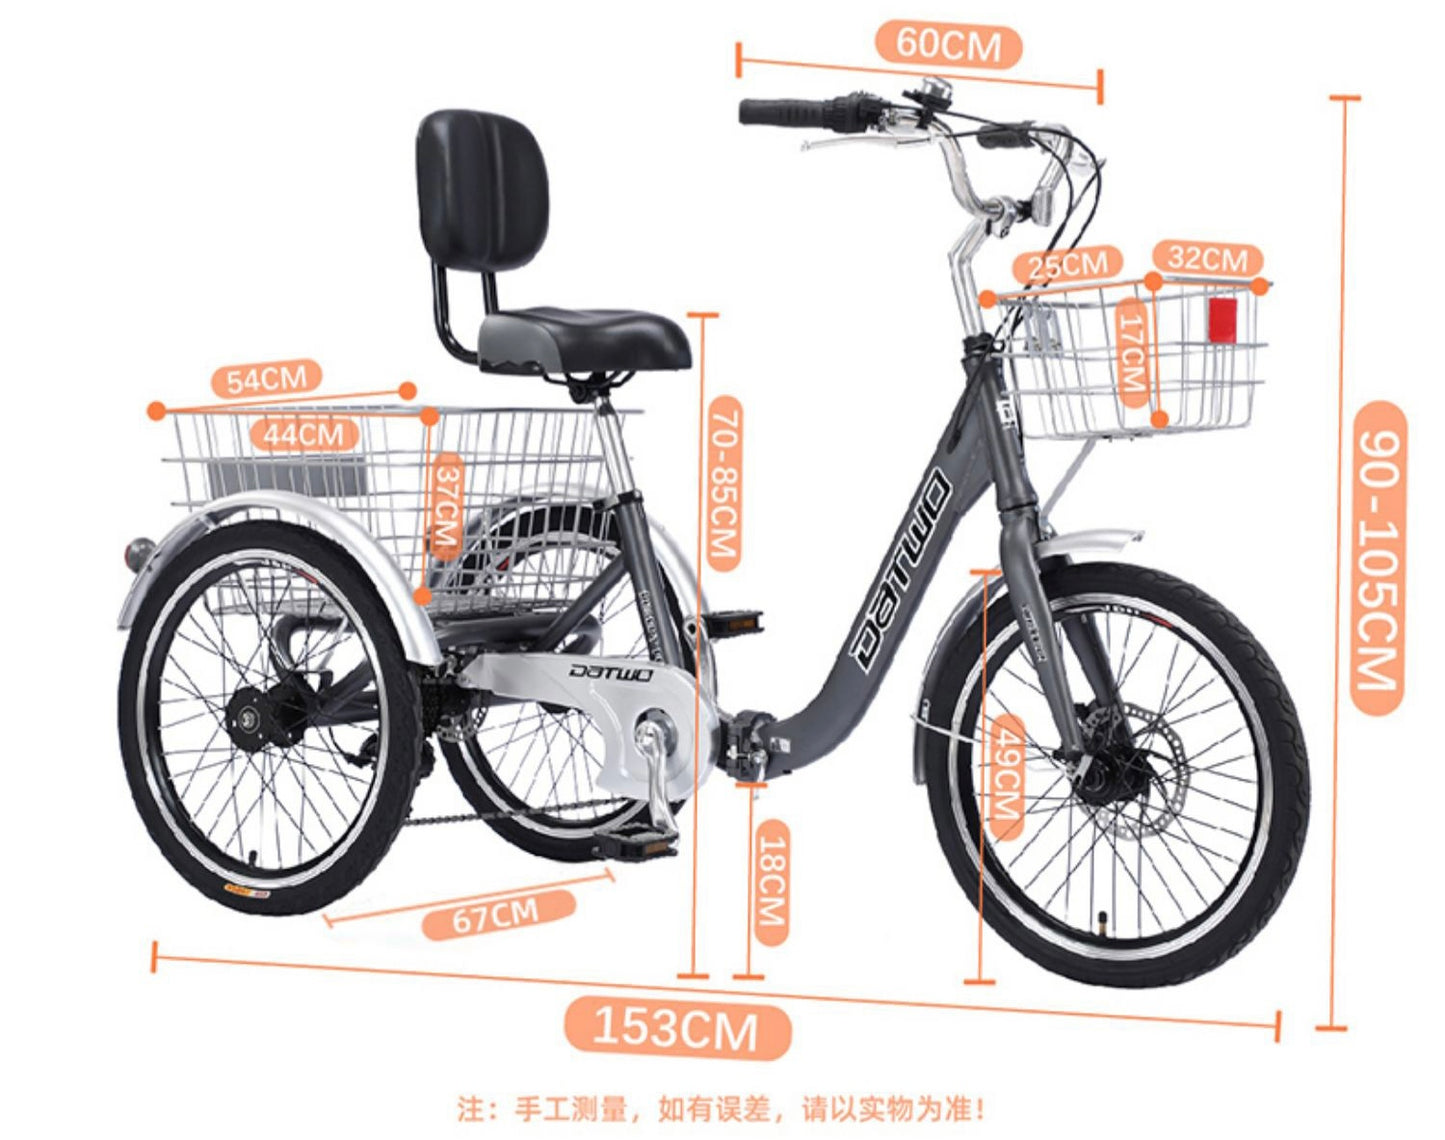 FOREKNOW 20 INCH TRICYCLE GRAY 7 SPEED FOLDABLE BIKE (PreOrder)